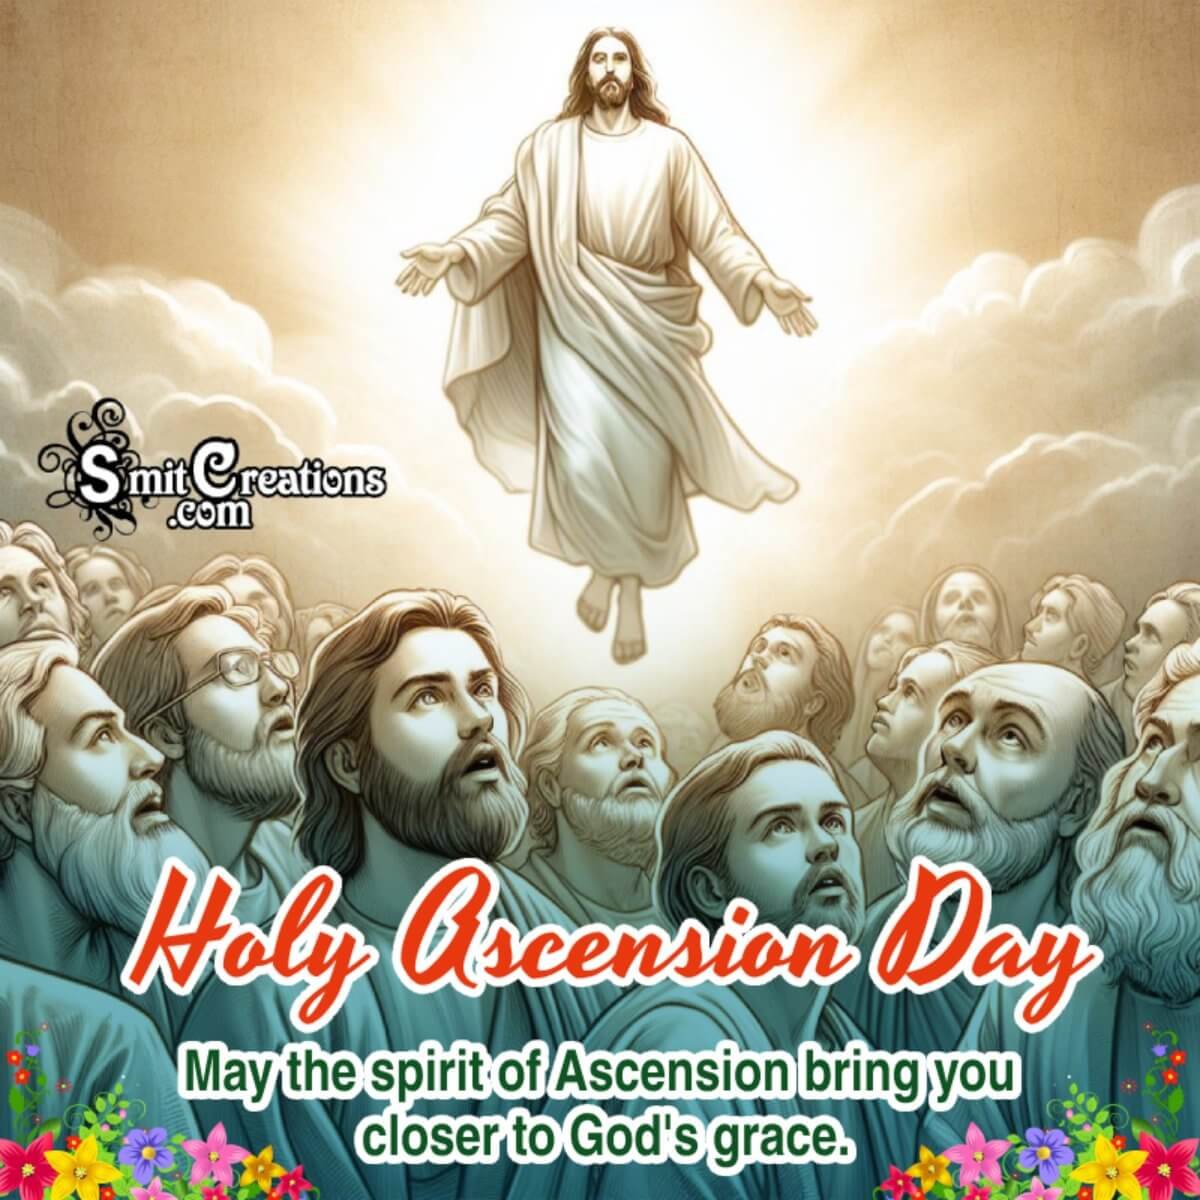 Holy Ascension Day Wishing Picture